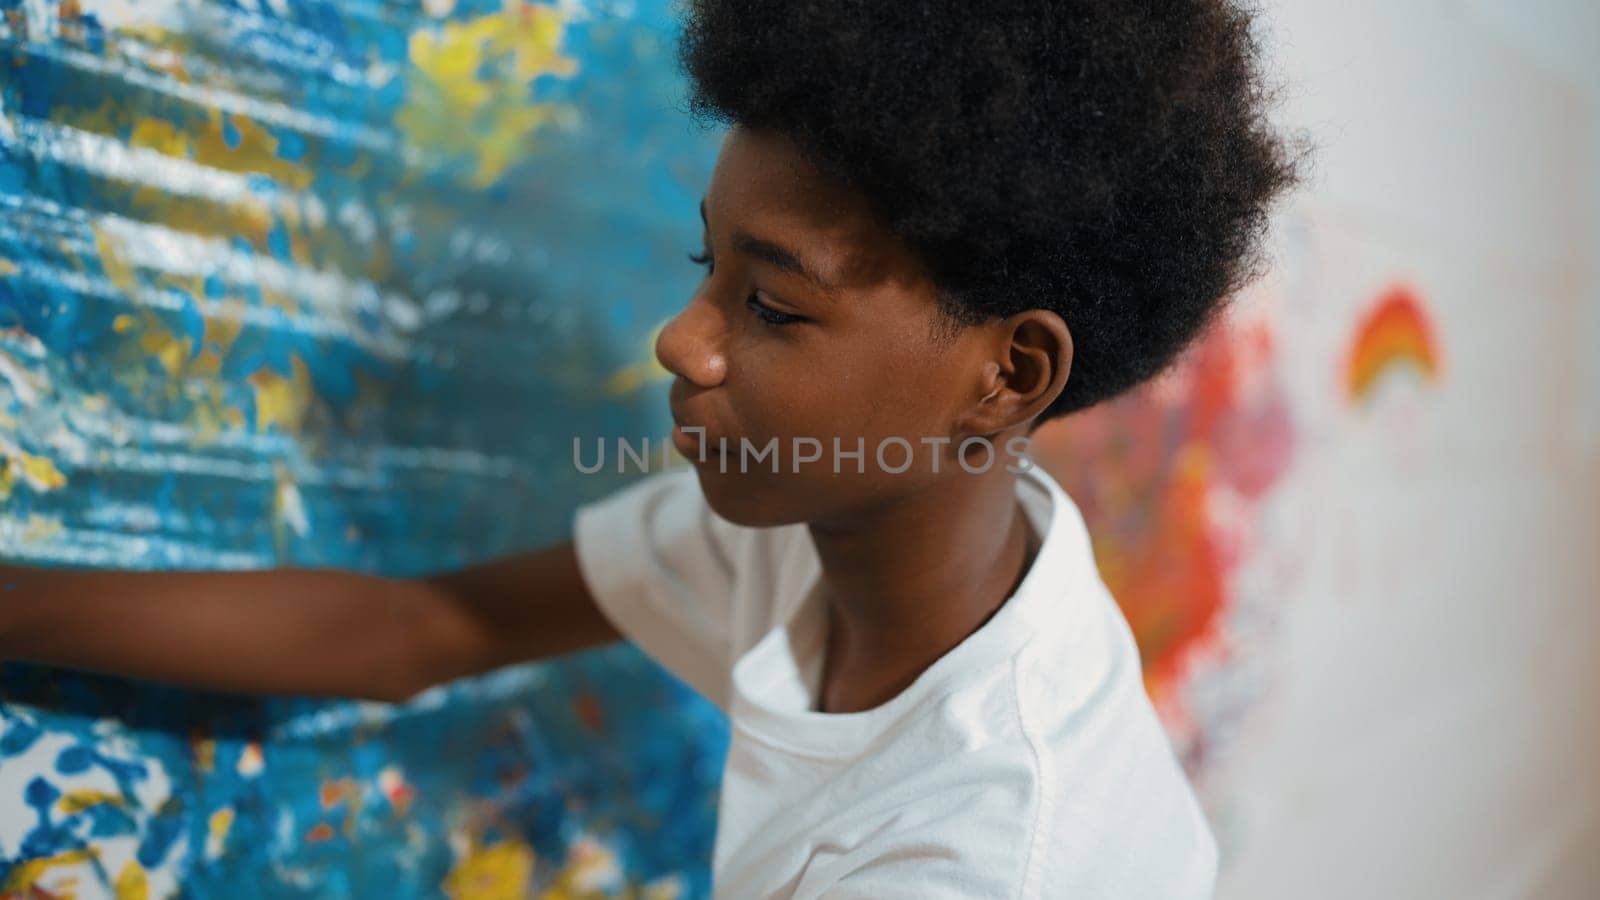 Side view of happy african boy painted the stained wall with colorful hand while wearing casual white shirt in art lesson.Smart student use hand print to make creative artwork. Education. Edification.